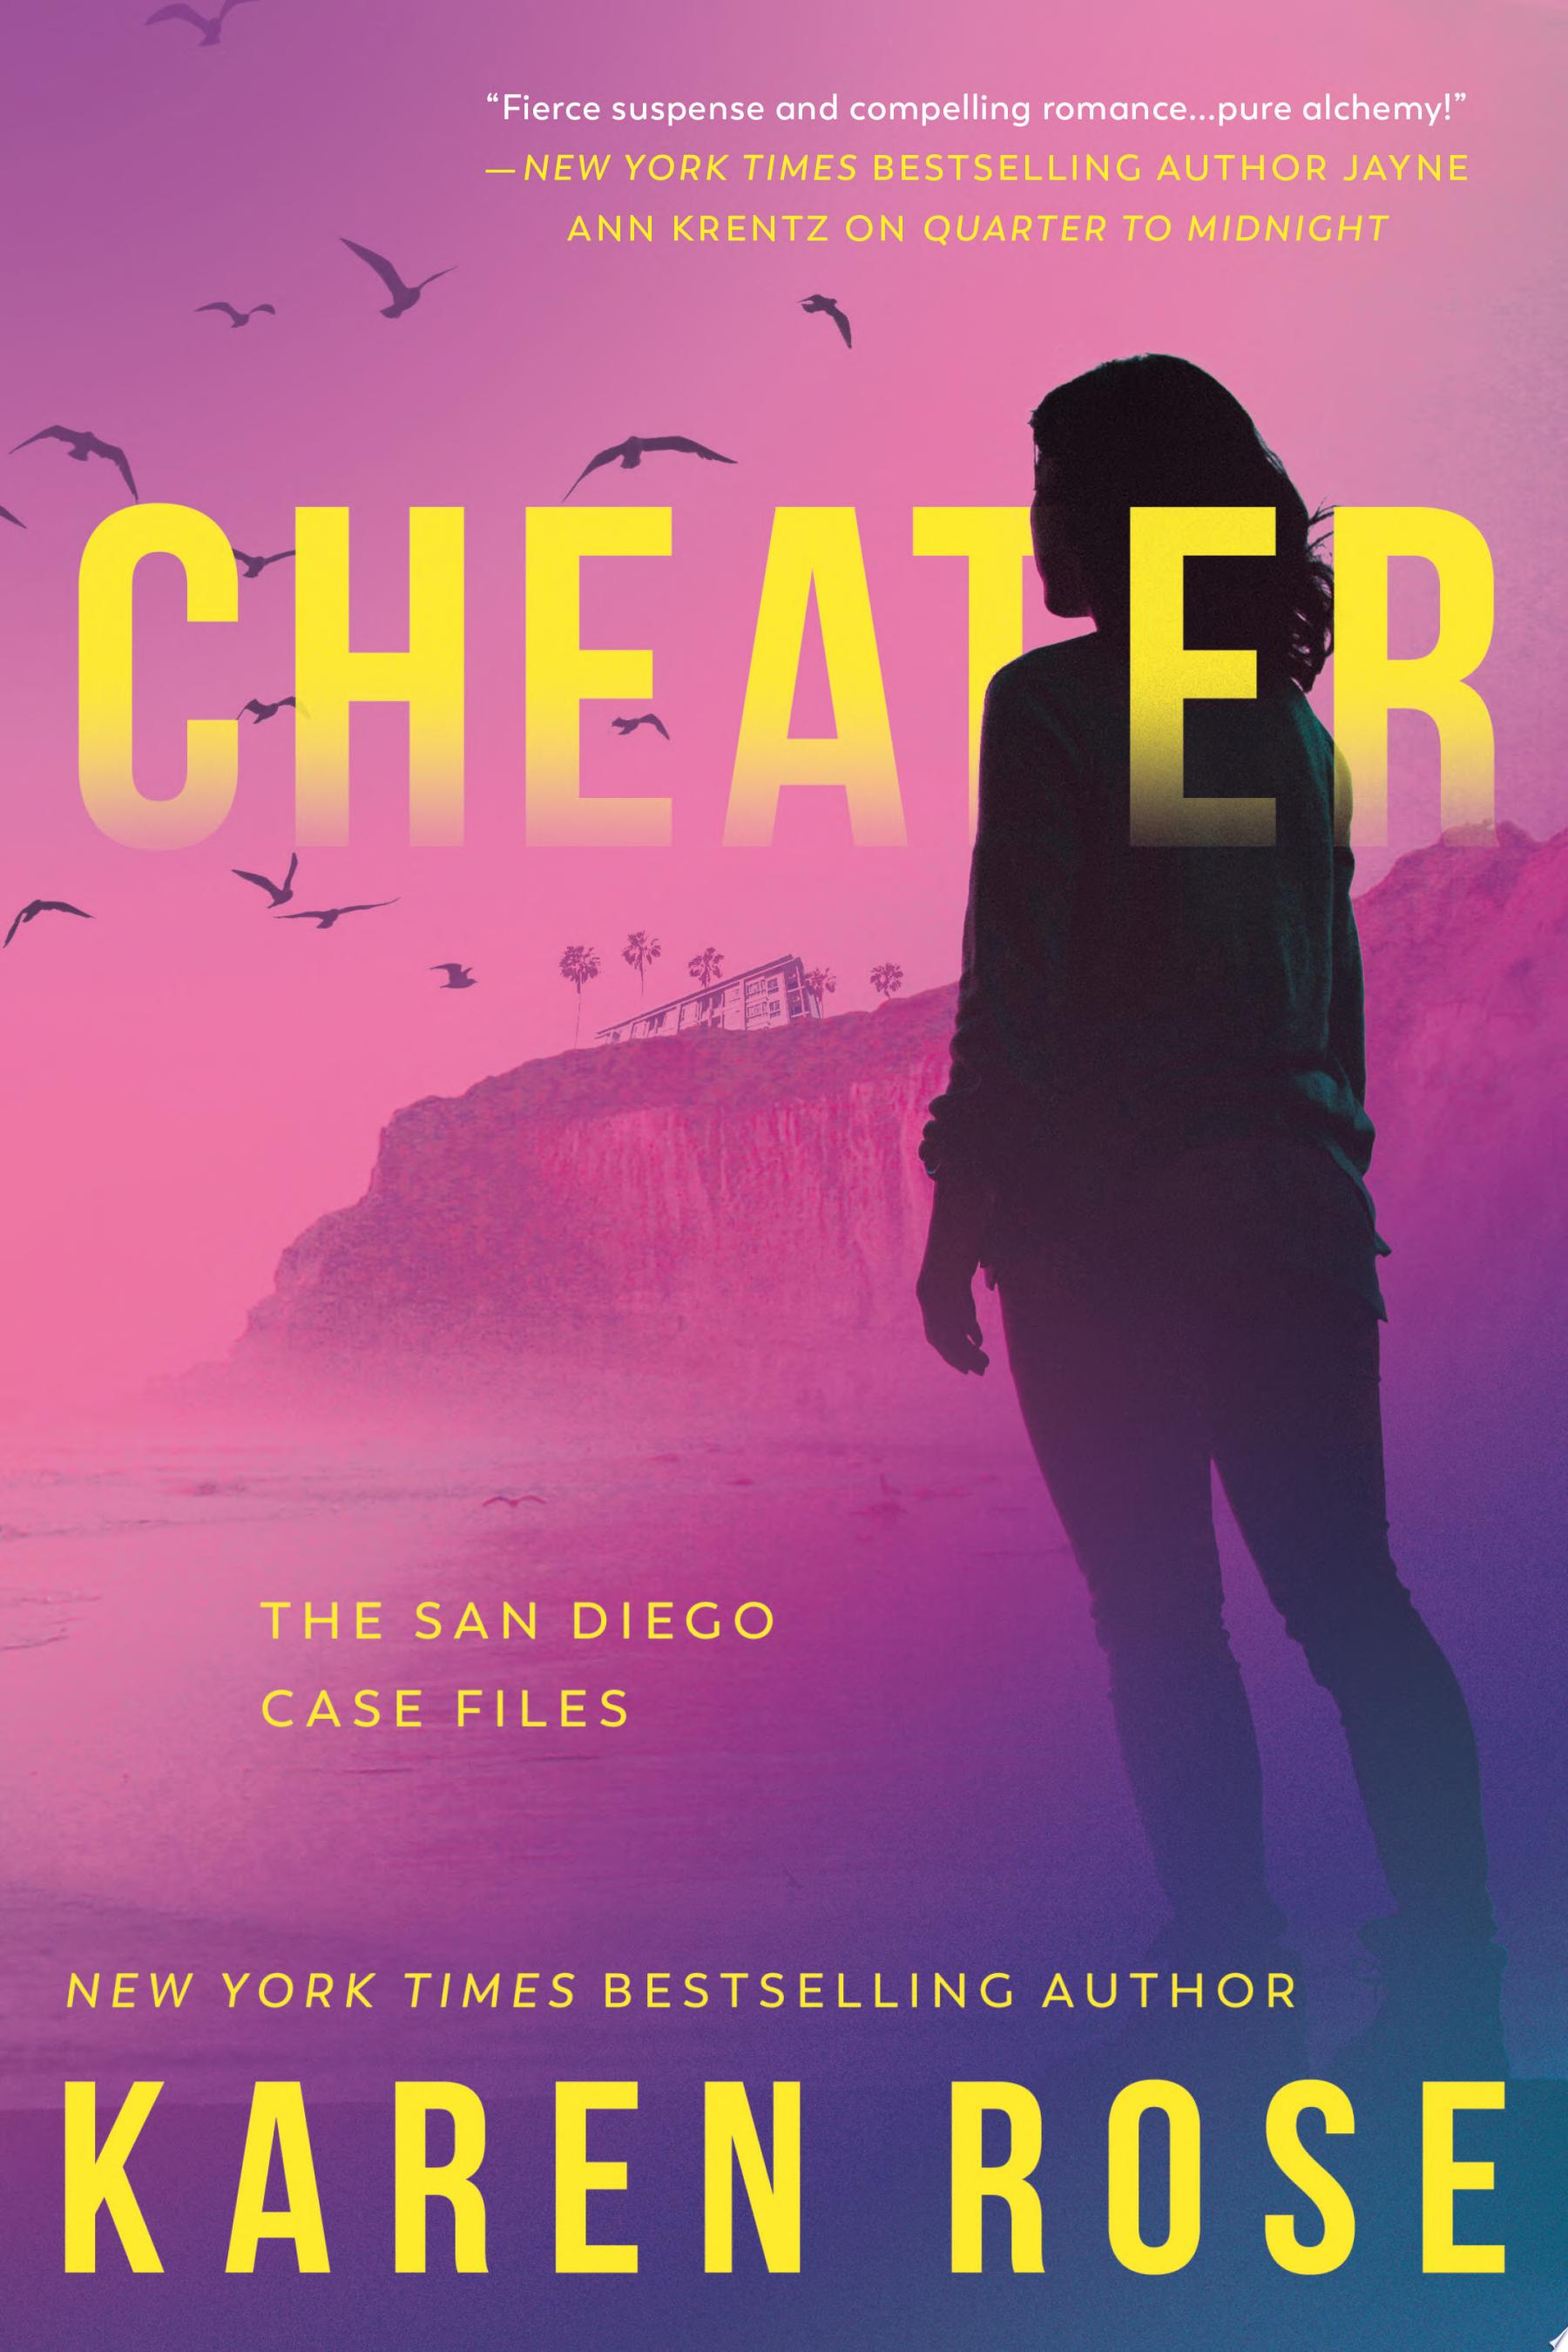 Image for "Cheater"